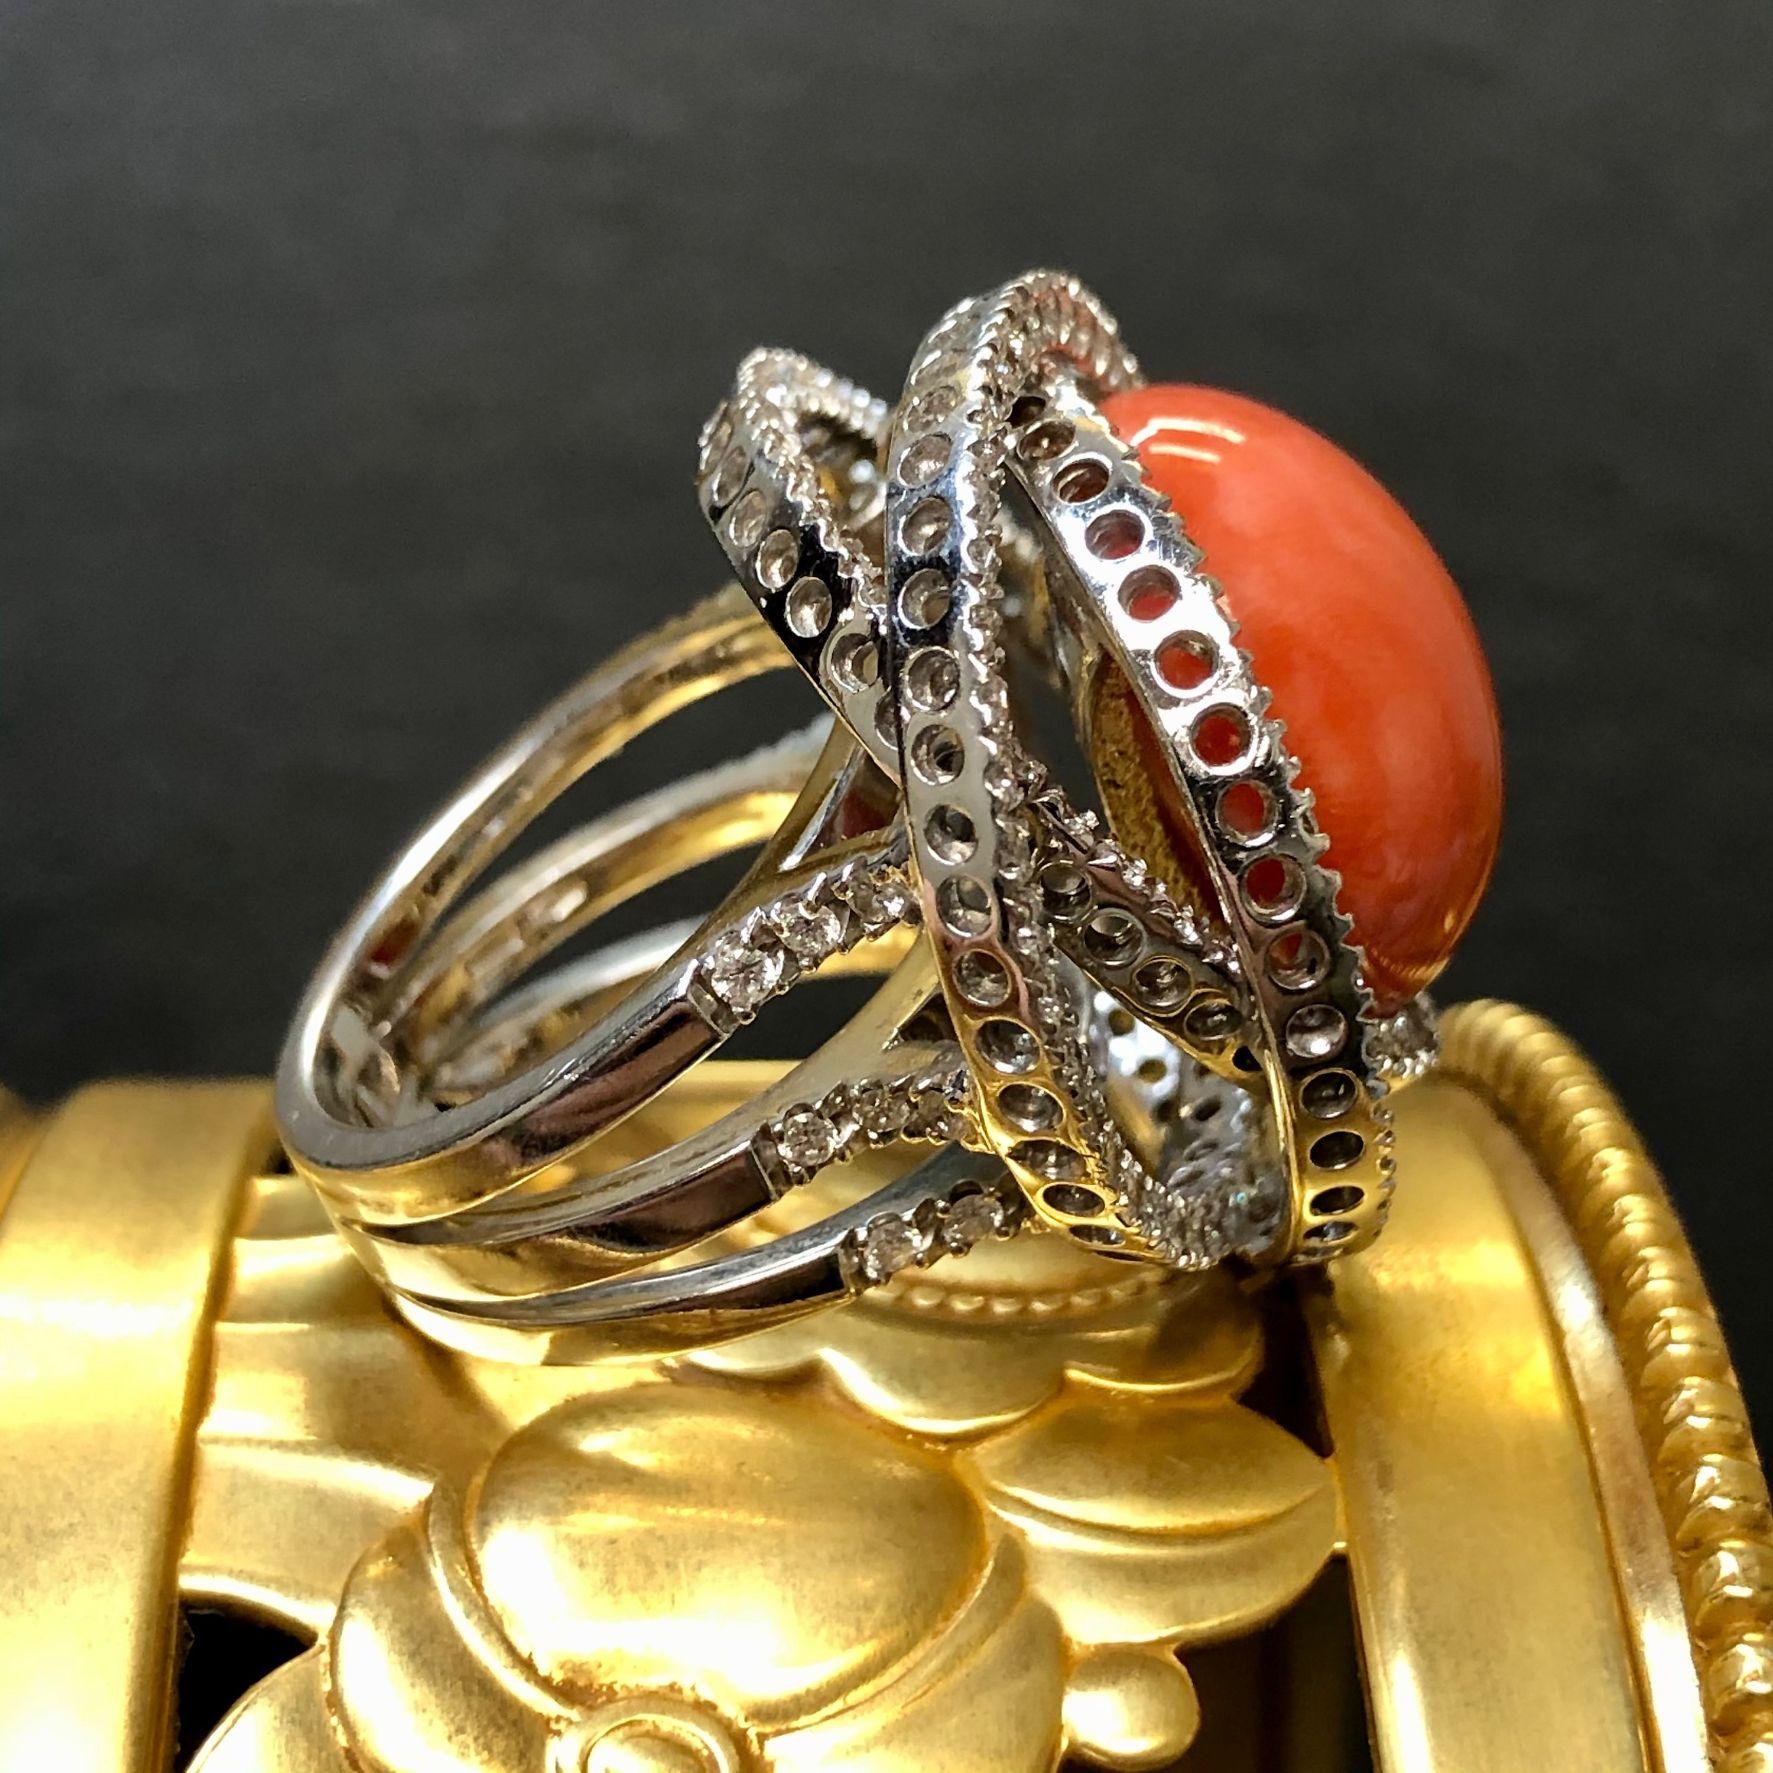 An exceptionally crafted ring by famed Italian designer LEO PIZZO. This ring is crafted in 18K white gold and centered by a a beautiful piece of natural red coral surrounded by approximately 2.90cttw in G-H color Vs1-2 clarity